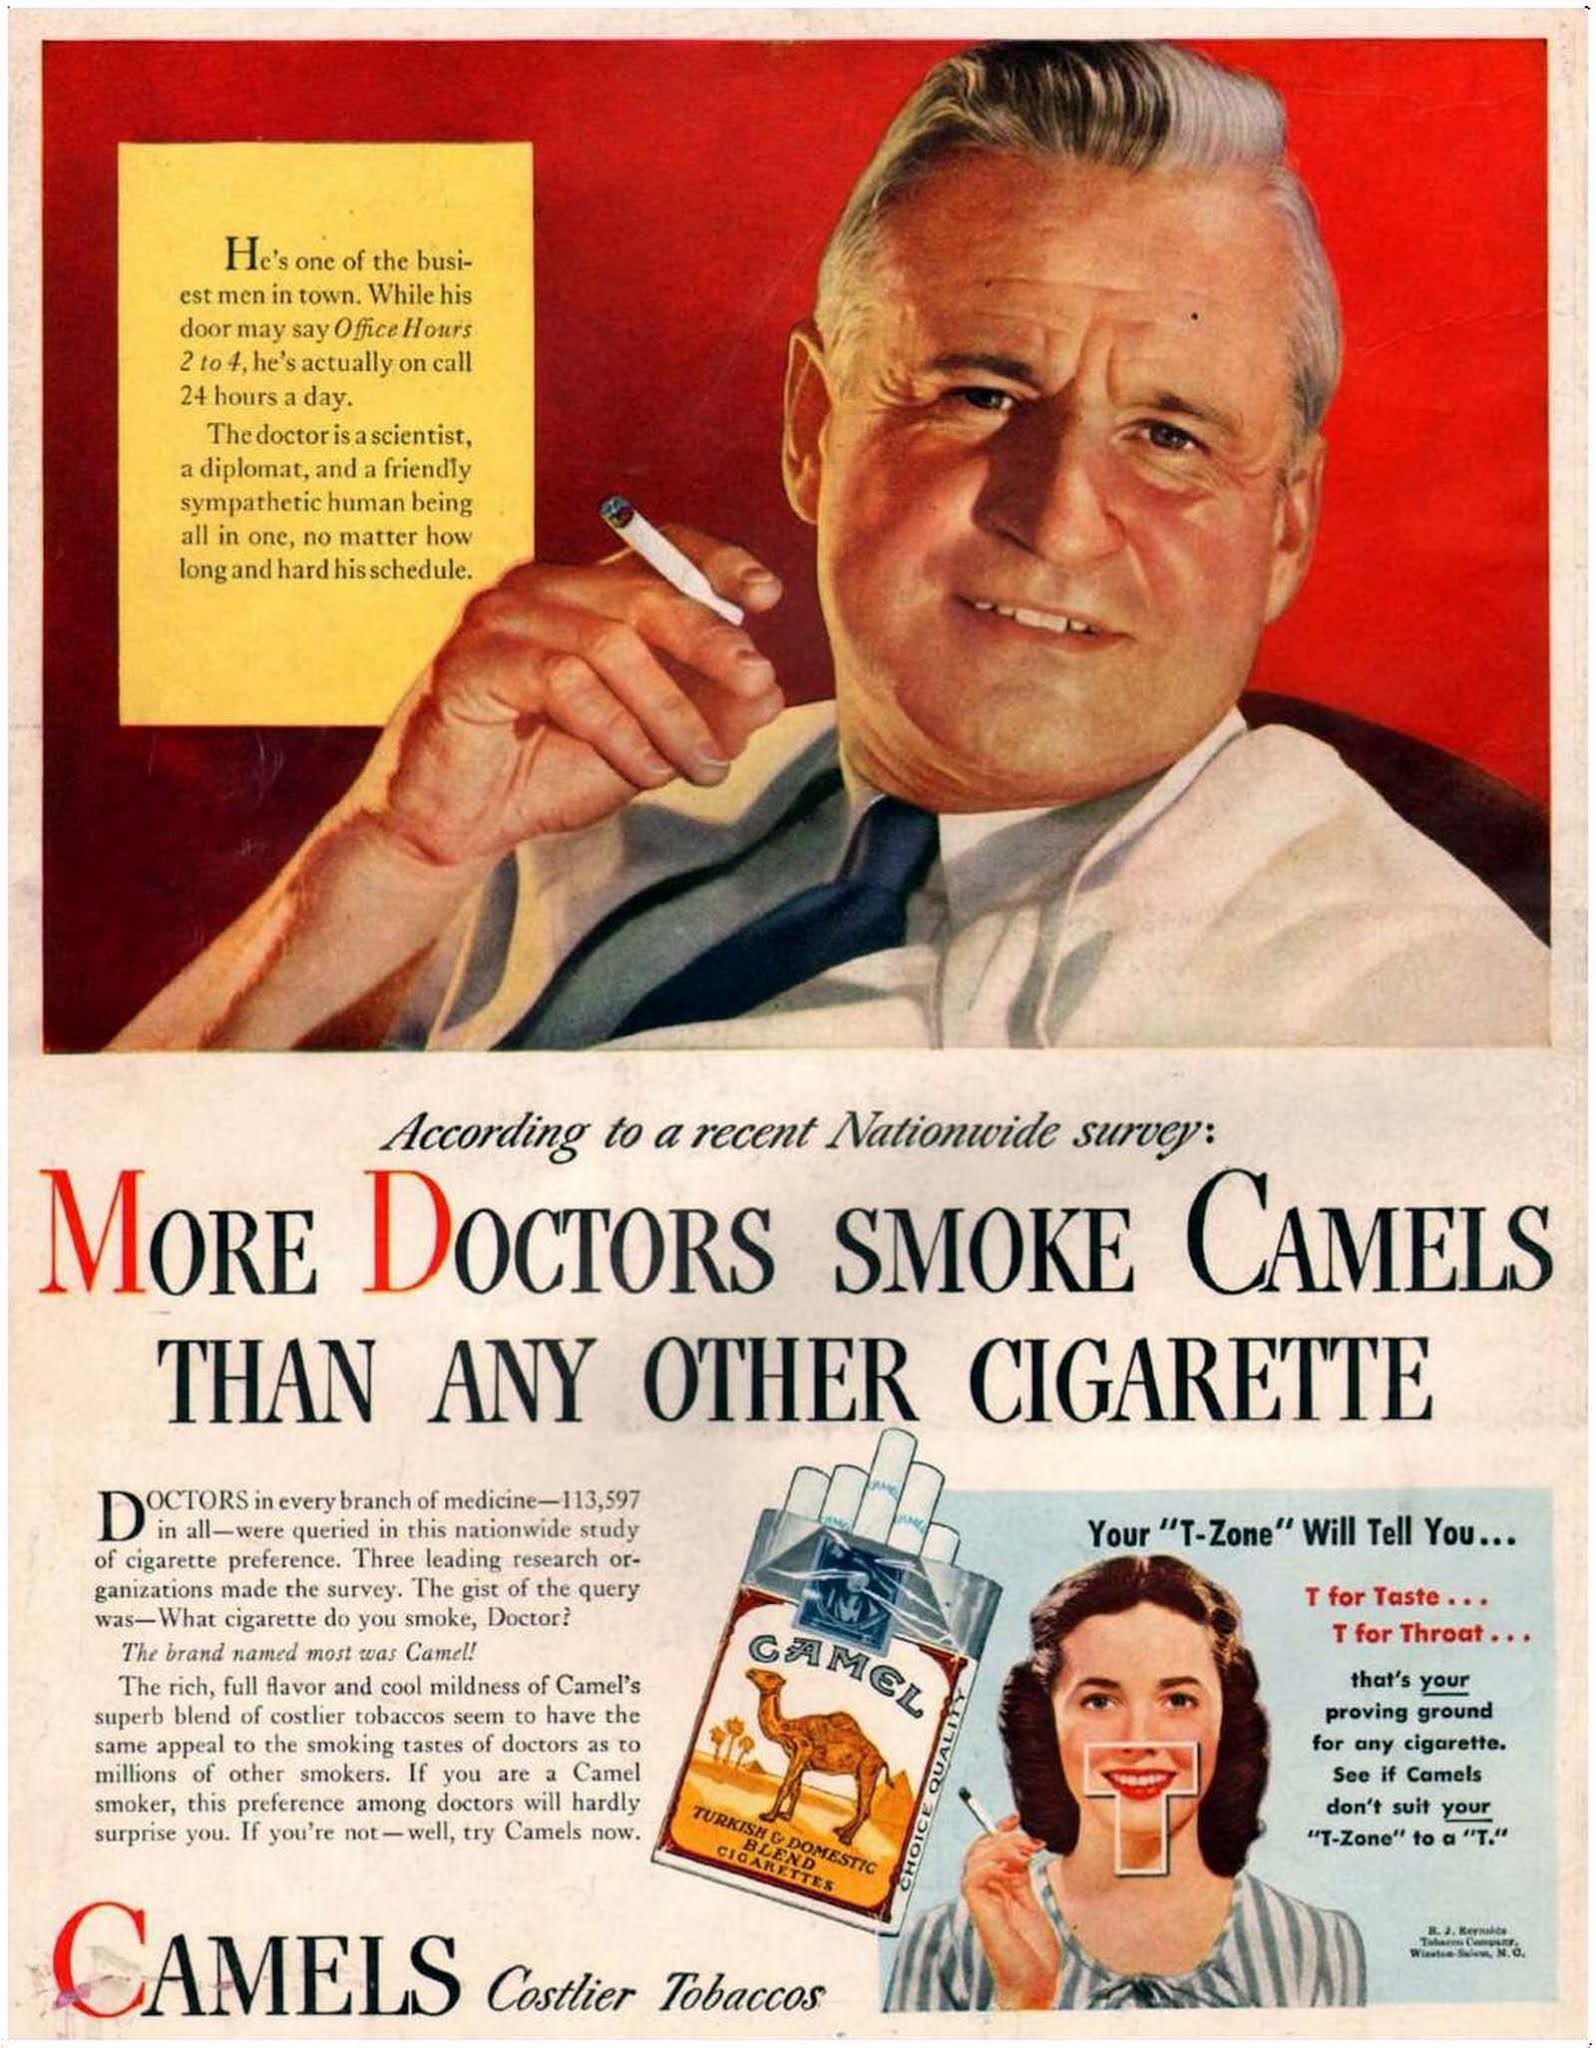 More doctors smoke Camels than any other cigarette.